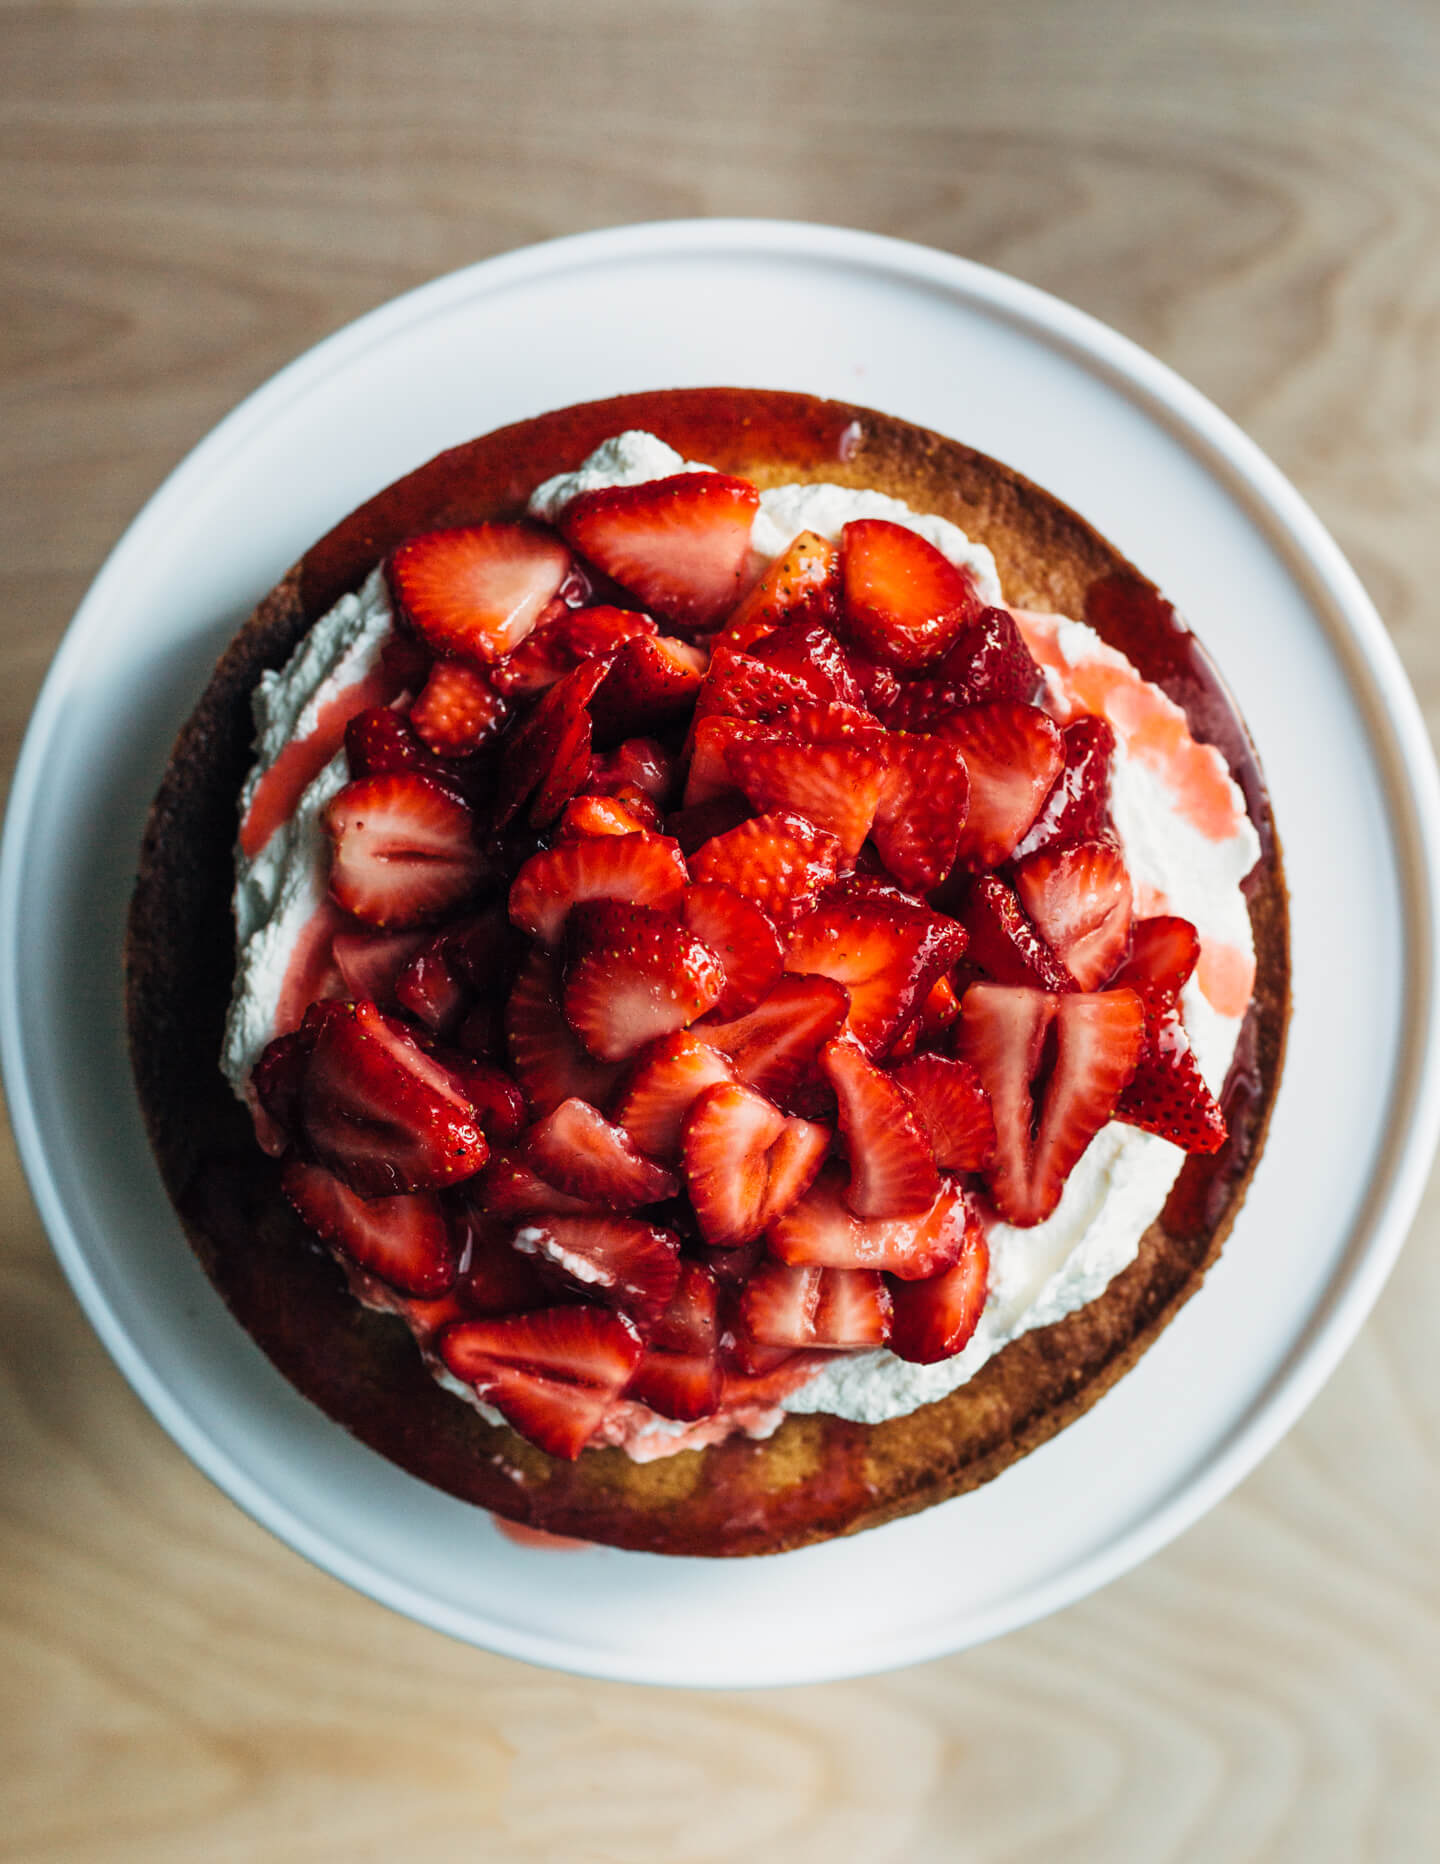 From Melissa Coleman's new book The Minimalist Kitchen, a delightfully simple strawberry yogurt shortcake that's easy enough to bake on a weeknight. 